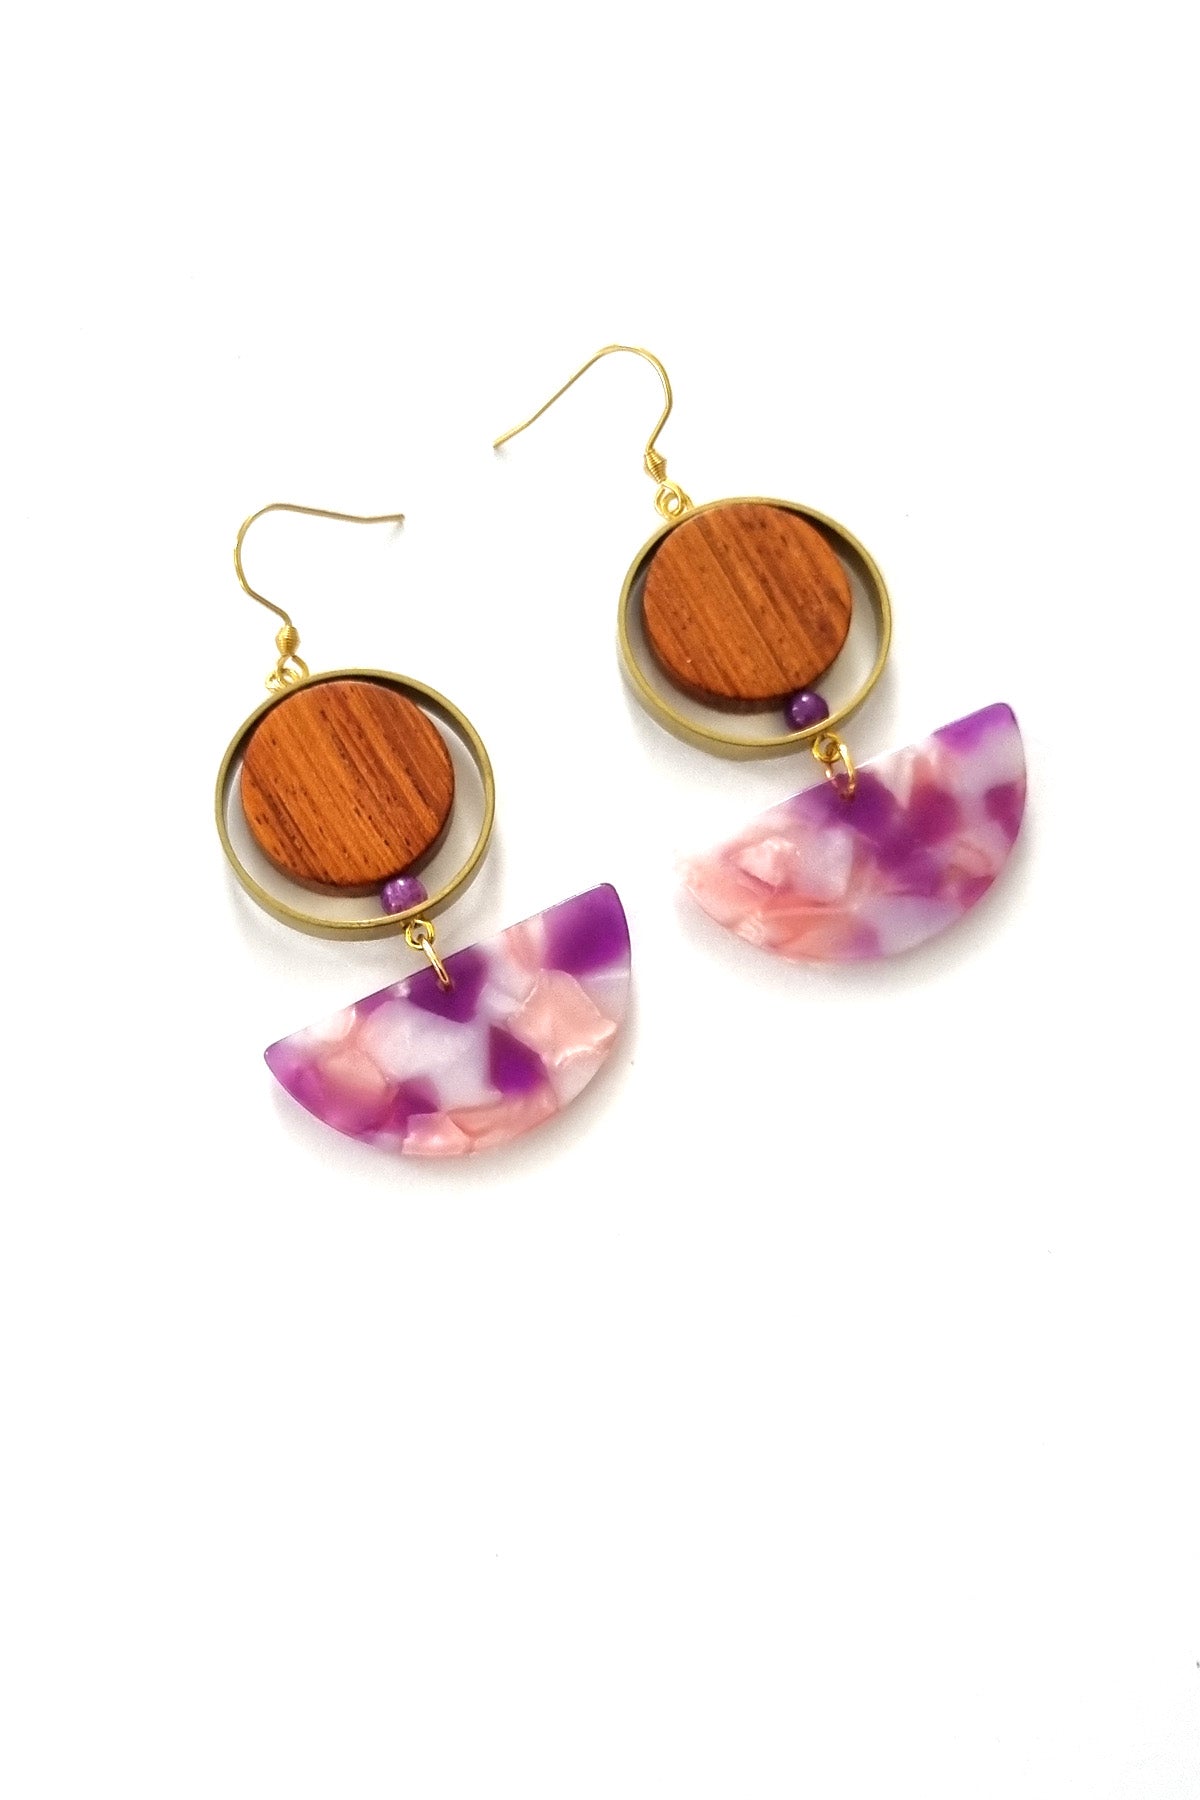 A pair of hook dangle earrings sit against a white background. They feature a circular wooden bead and a small purple bead encircled by a brass ring. Below dangles a pink and purple multicoloured D-shaped acrylic piece.